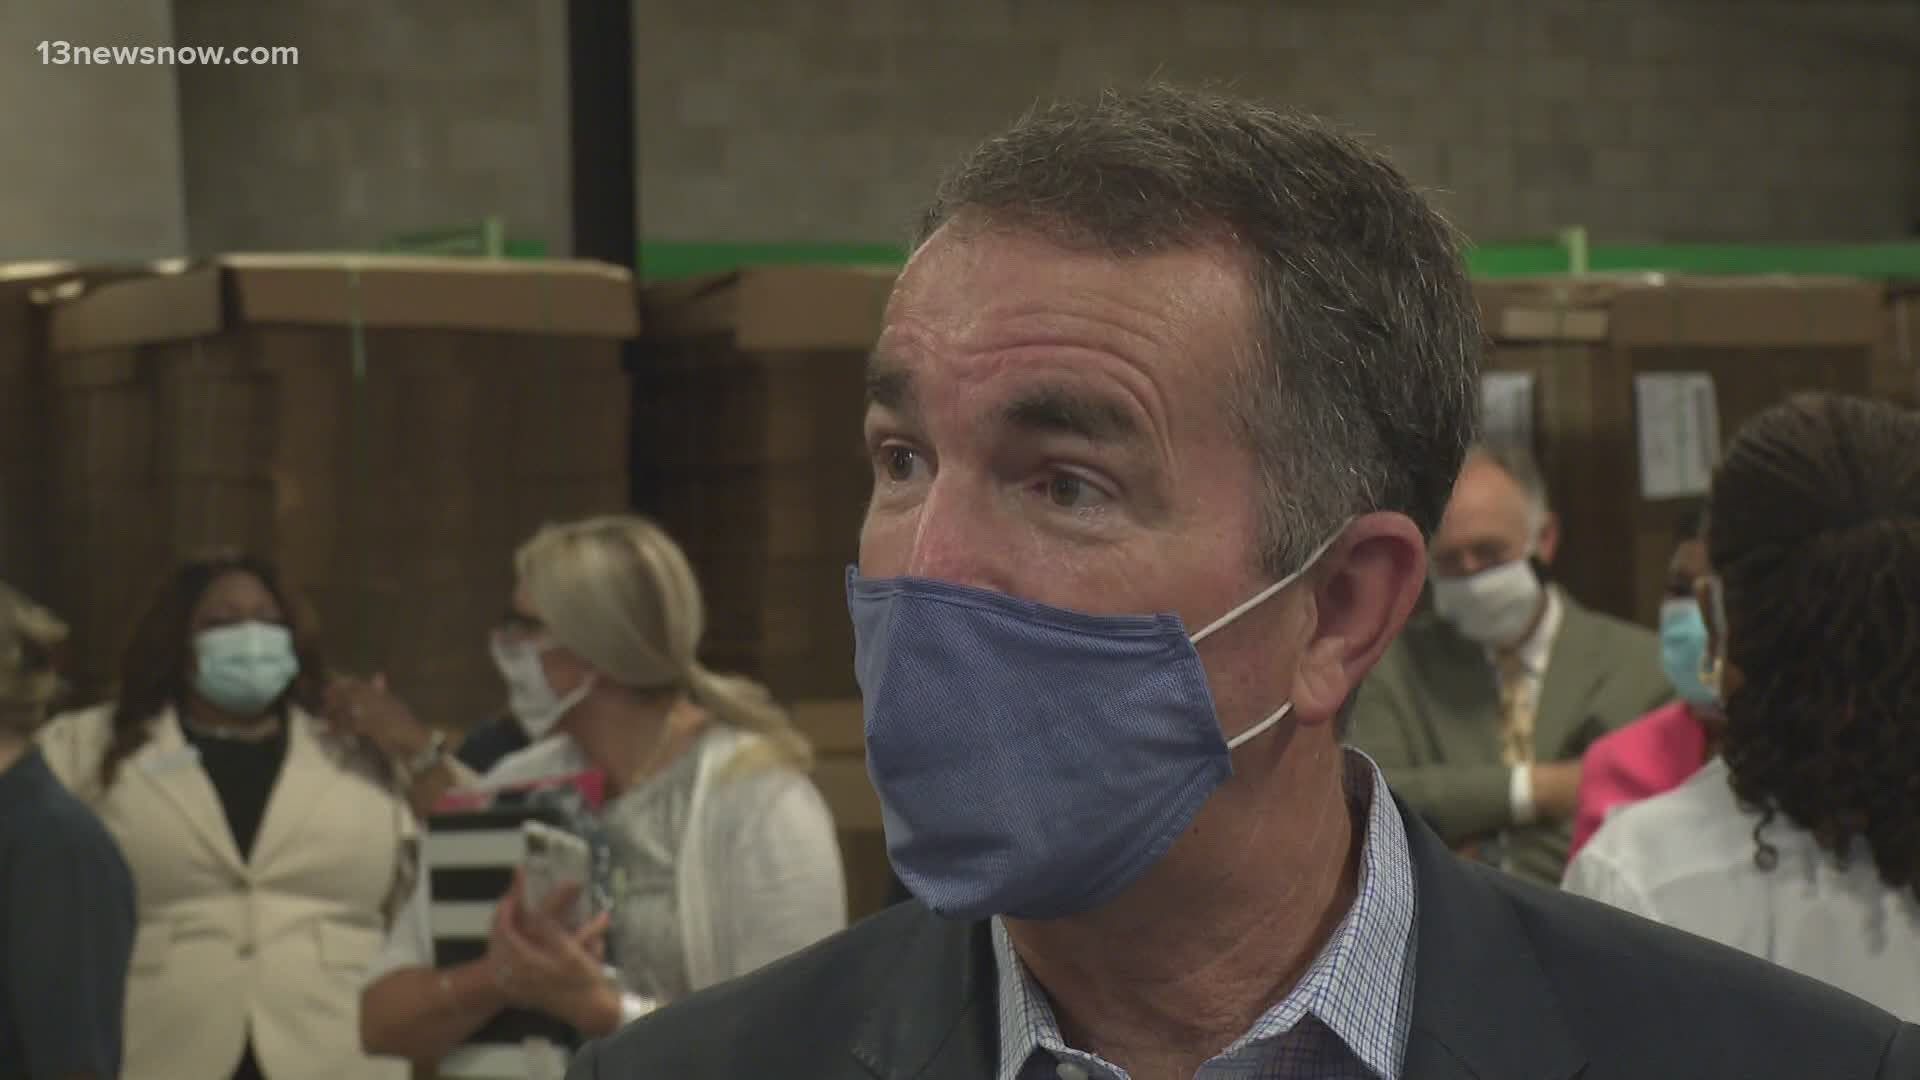 At a Norfolk event, Northam told 13News Now that he doesn't anticipate ordering evacuations, but he encouraged Hampton Roads residents to be prepared for the storm.